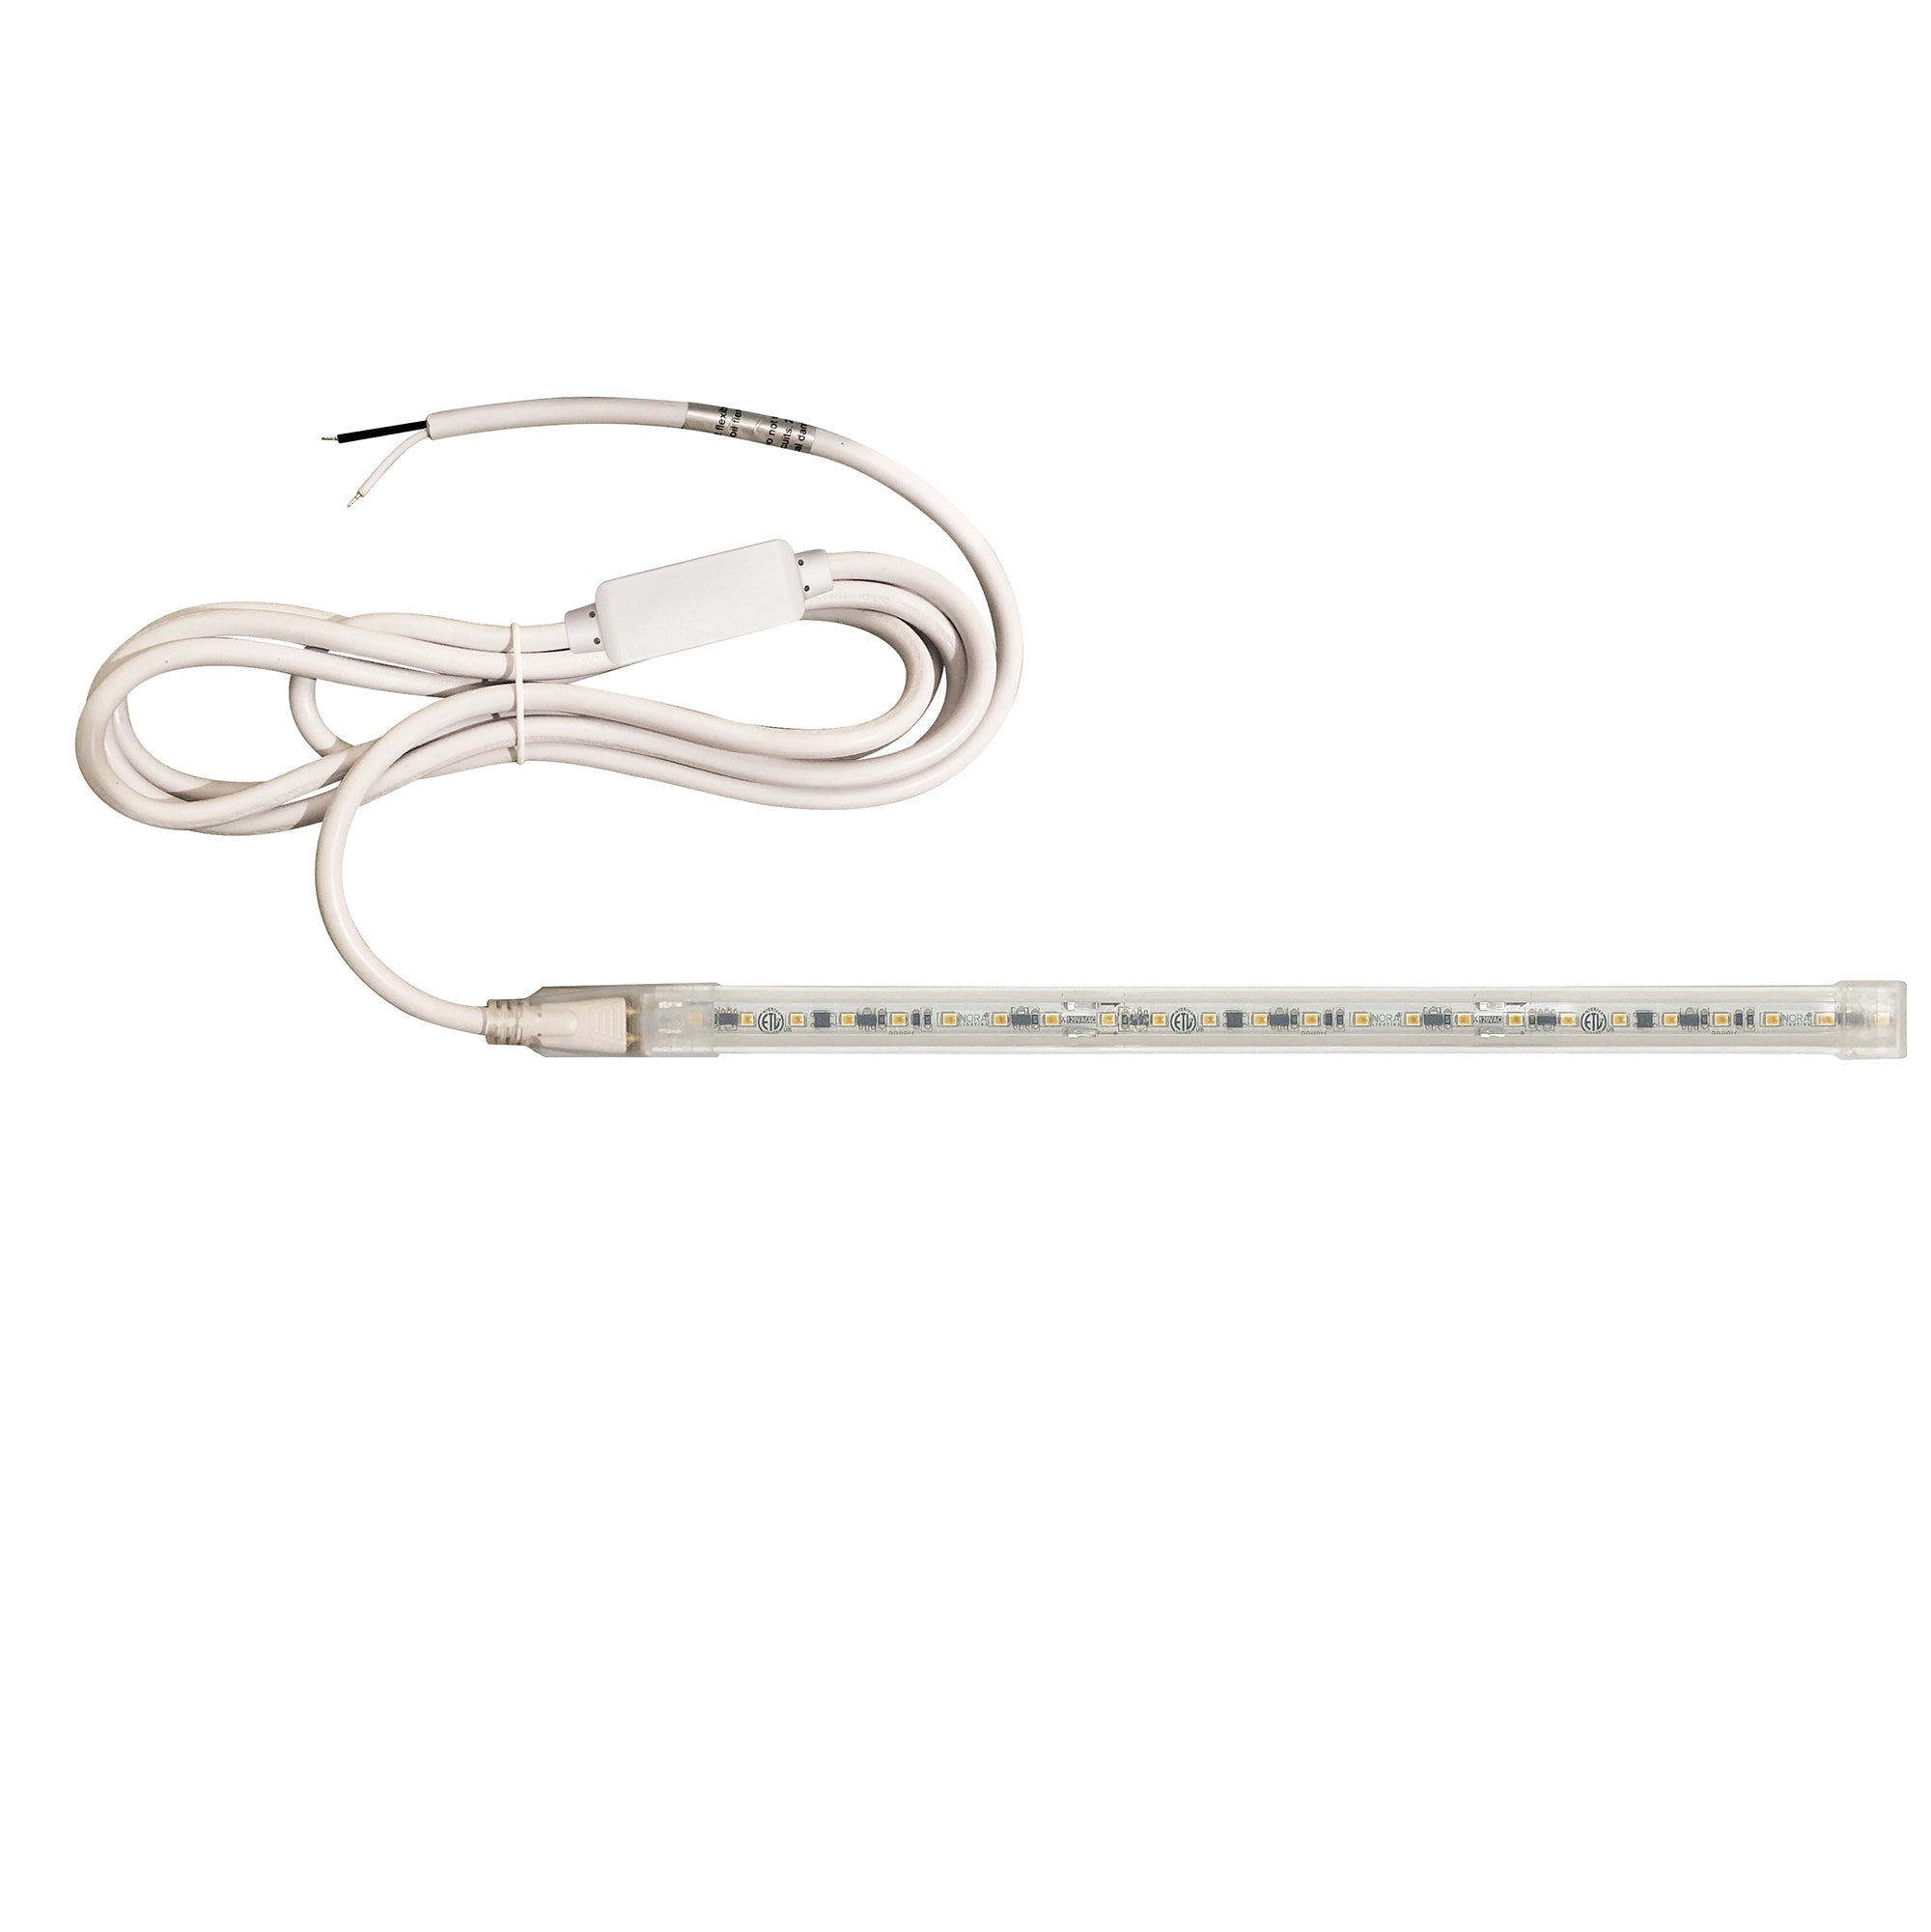 Nora Lighting NUTP13-W58-8-12-930/HWSP - Accent / Undercabinet - Custom Cut 58-ft, 8-in 120V Continuous LED Tape Light, 330lm / 3.6W per foot, 3000K, w/ Mounting Clips and 8' Hardwired Power Cord w/ Surge Protector